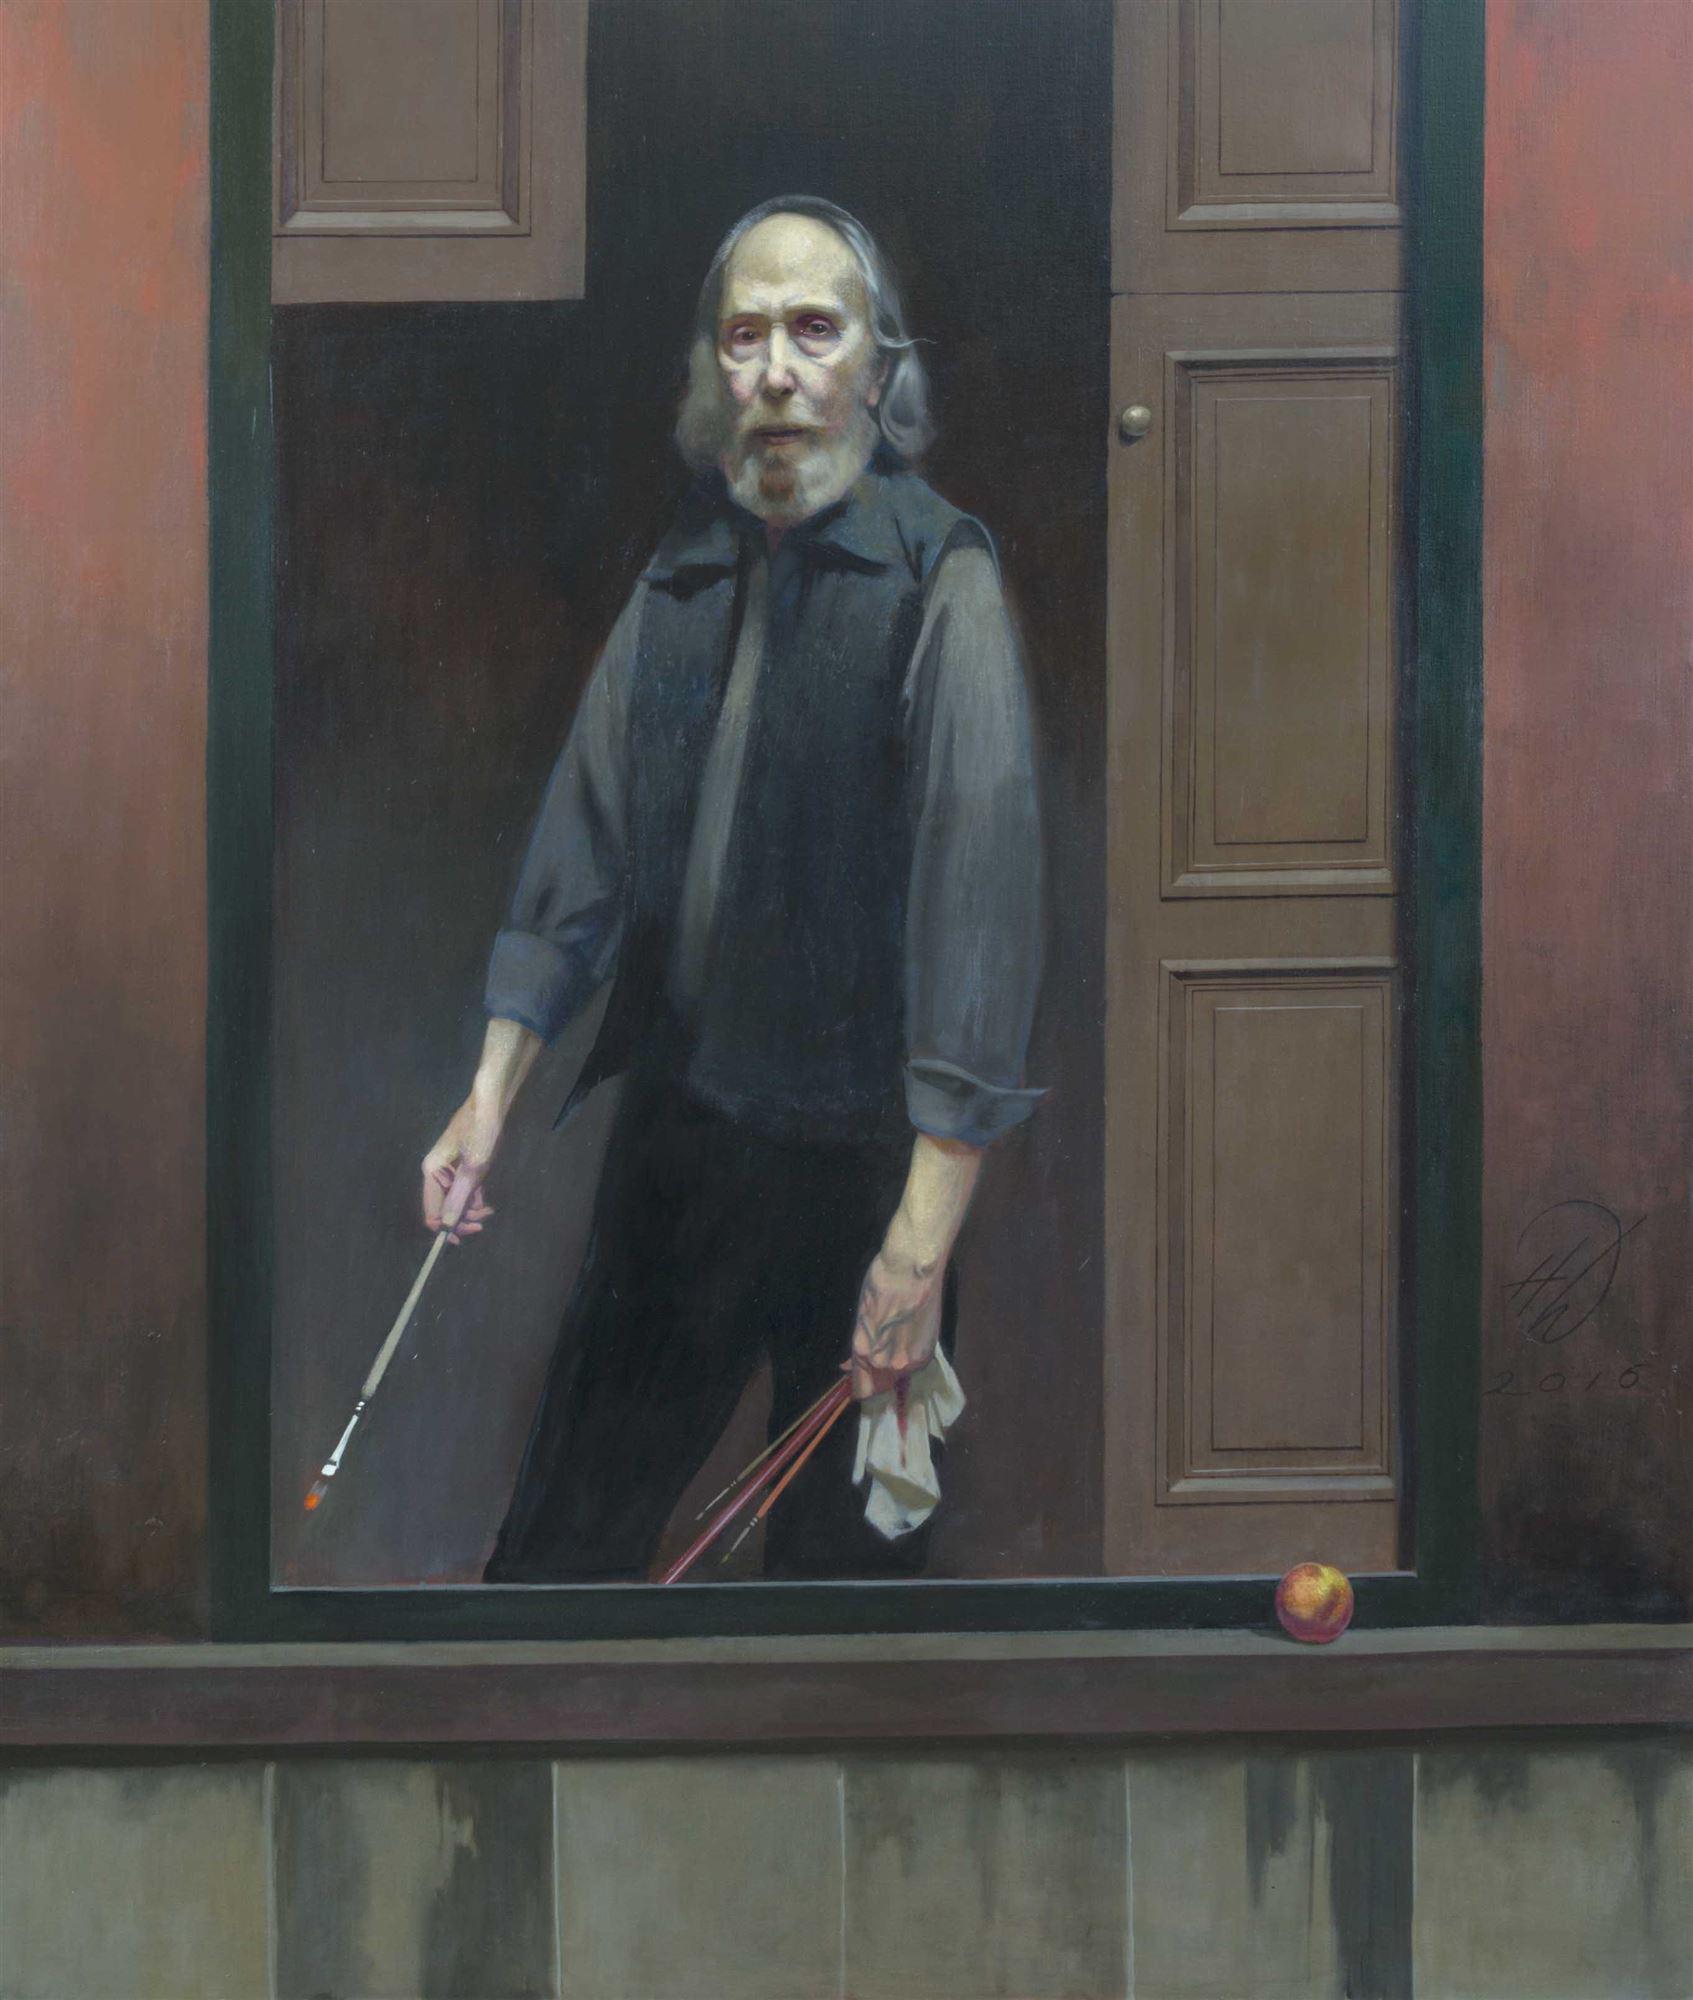 
		                					Harvey Dinnerstein		                																	
																											<i>At the Window,</i>  
																																								2016, 
																																								oil on canvas, 
																																								64 3/4 x 54 3/4 inches 
																								
		                				